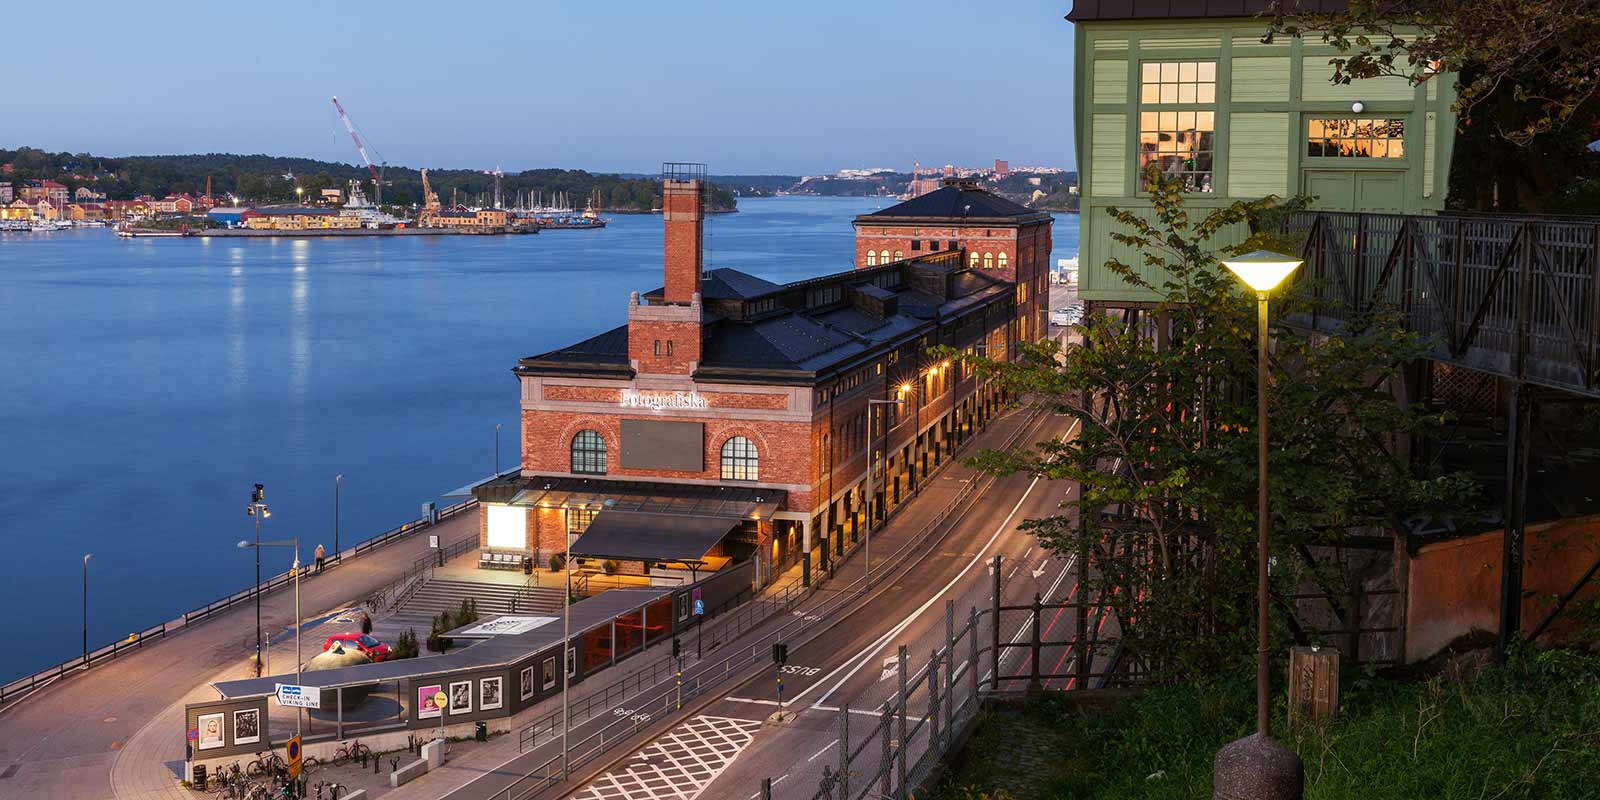 Fotografiska on the water seen from above during night